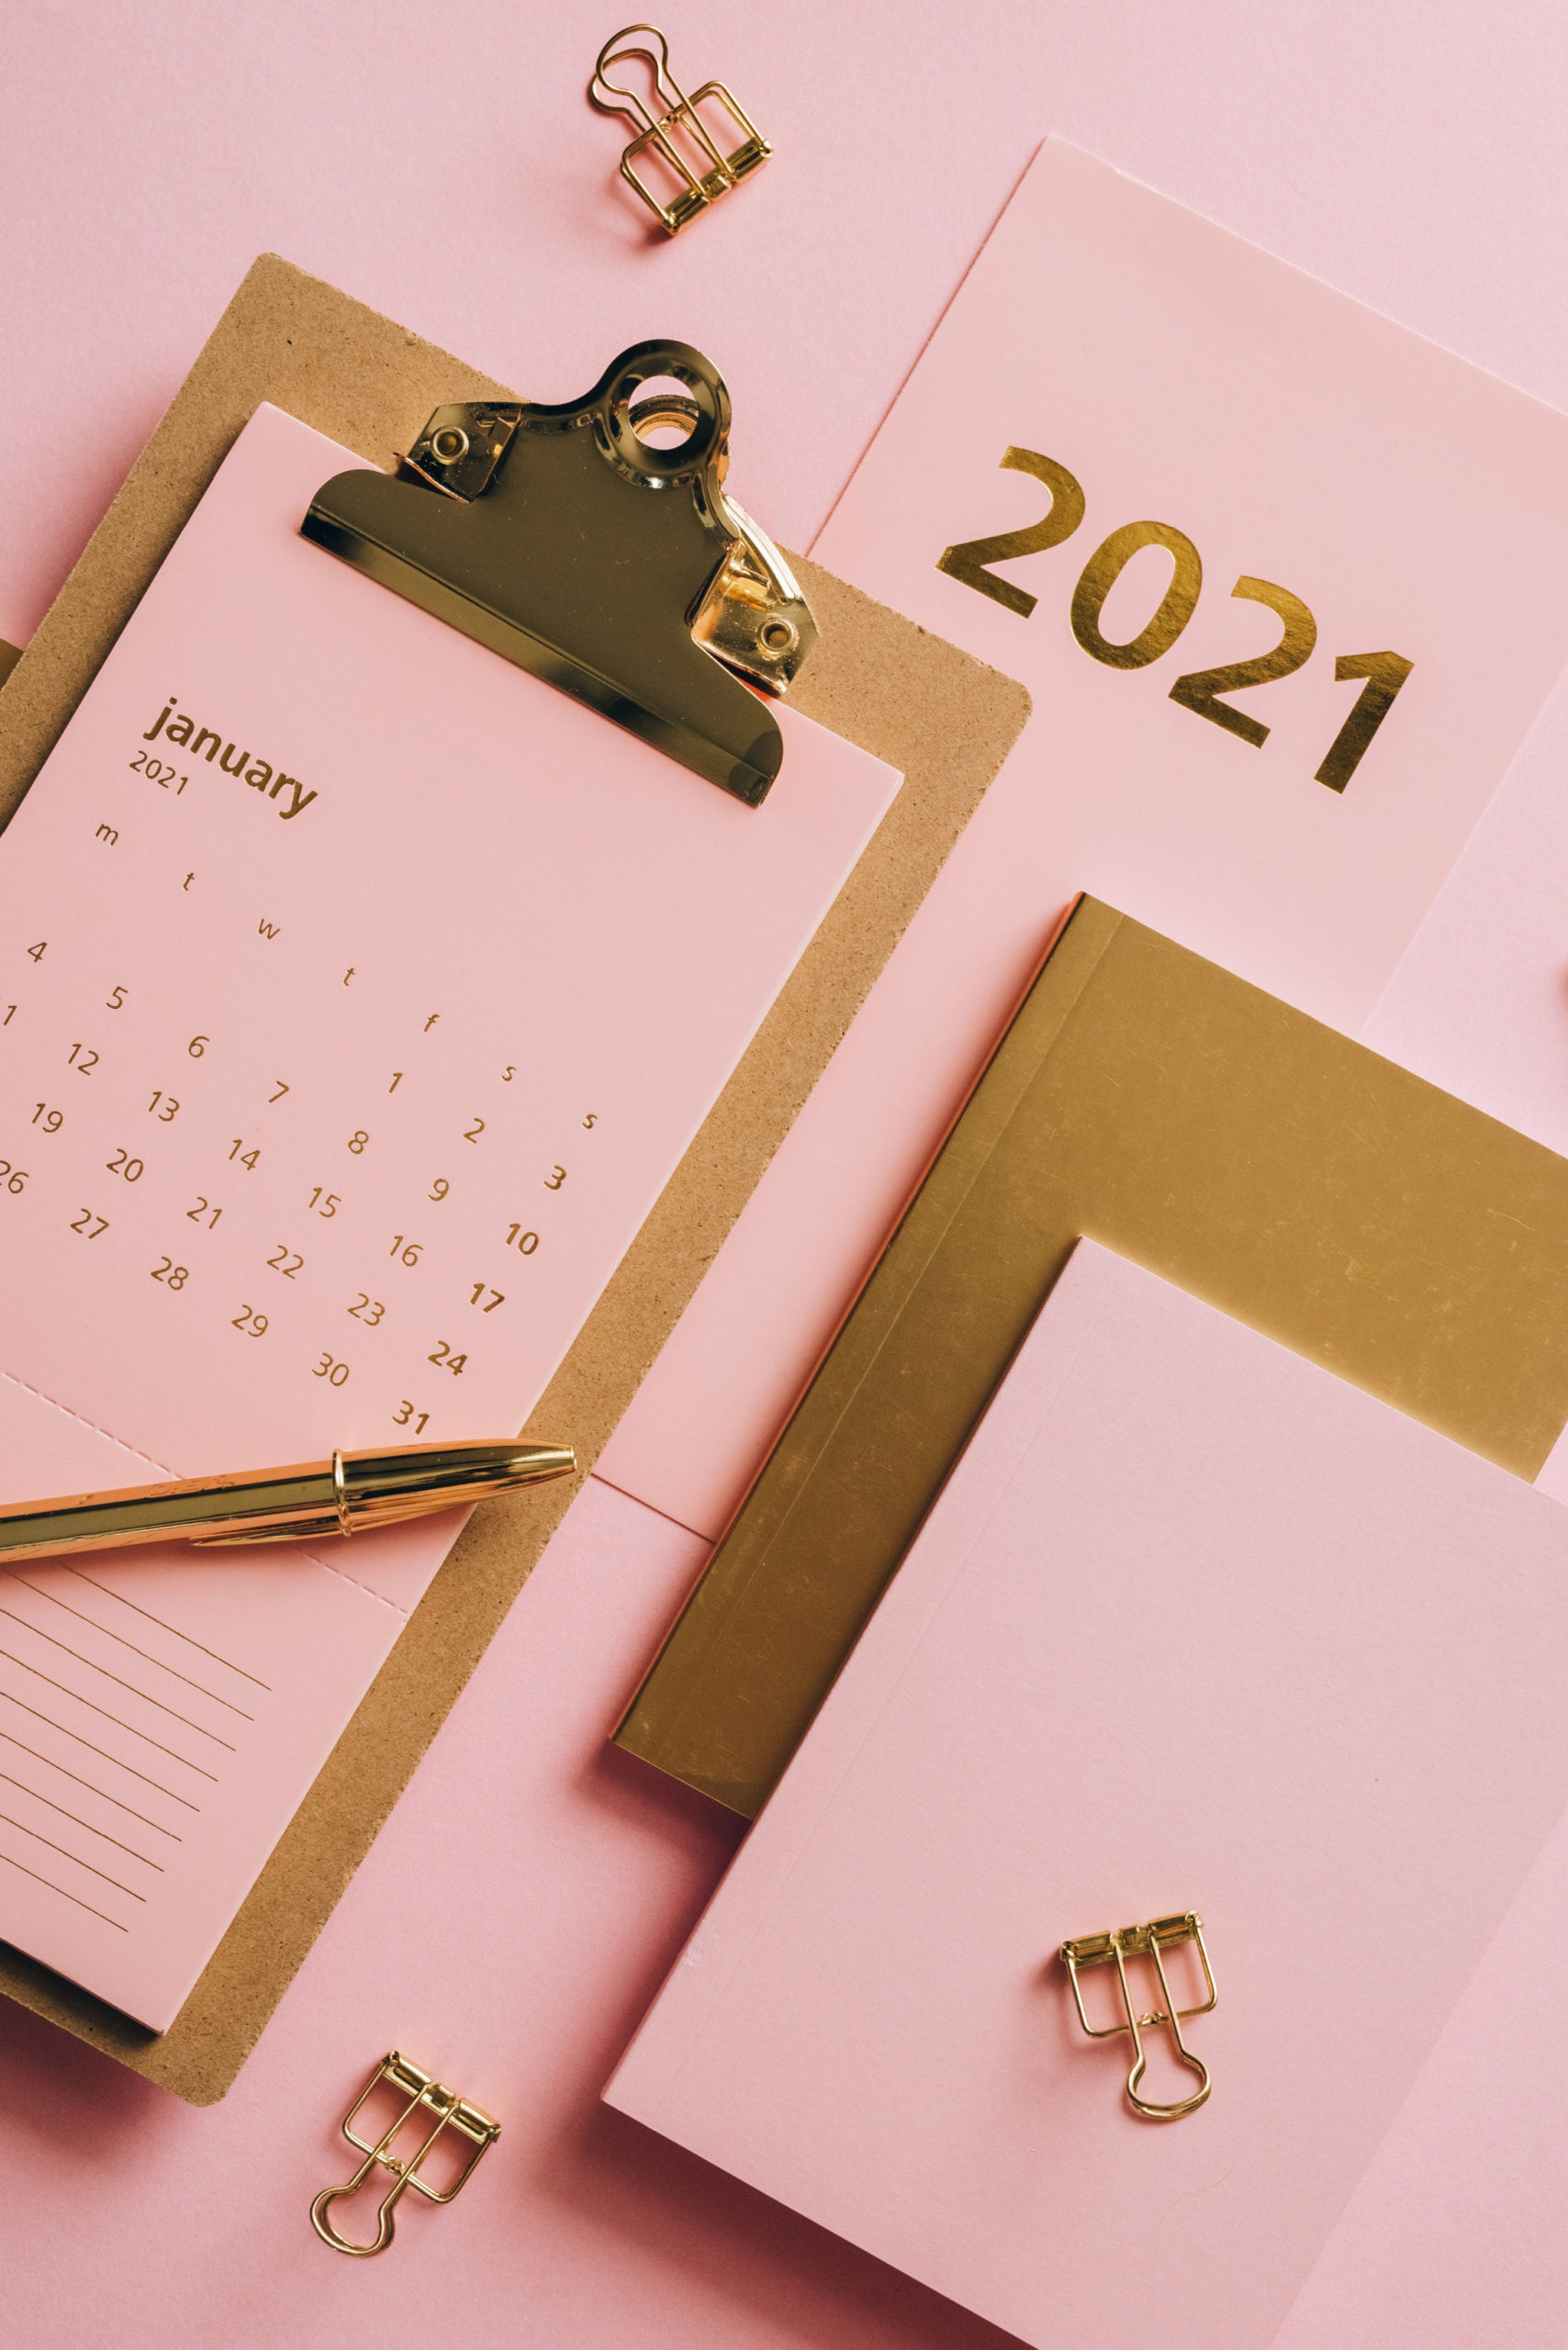 New Year, New You: How To Start 2021 Financially Strong